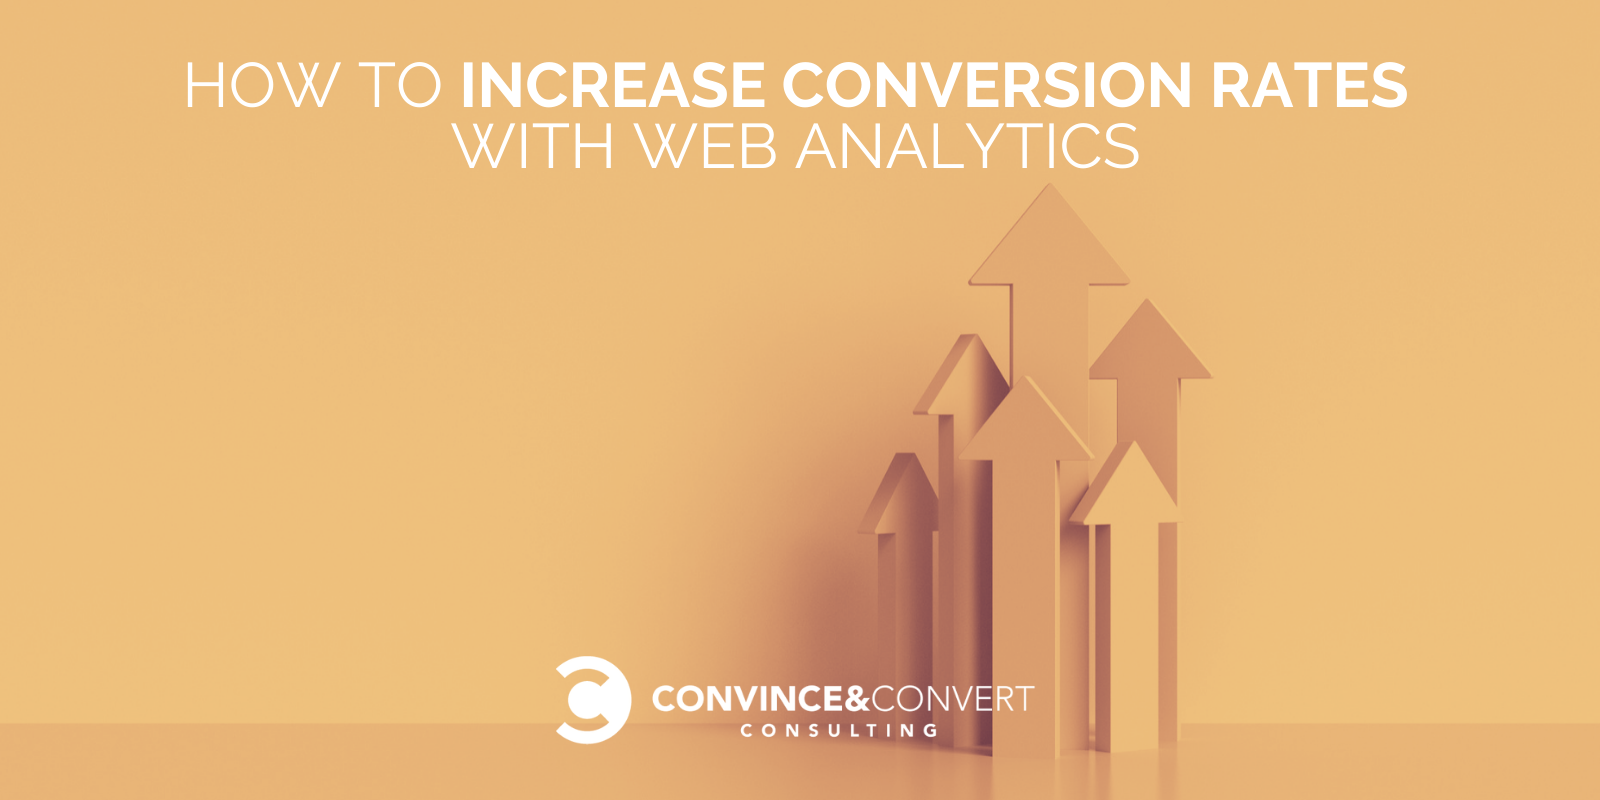 How to Increase Conversion Rates With Web Analytics